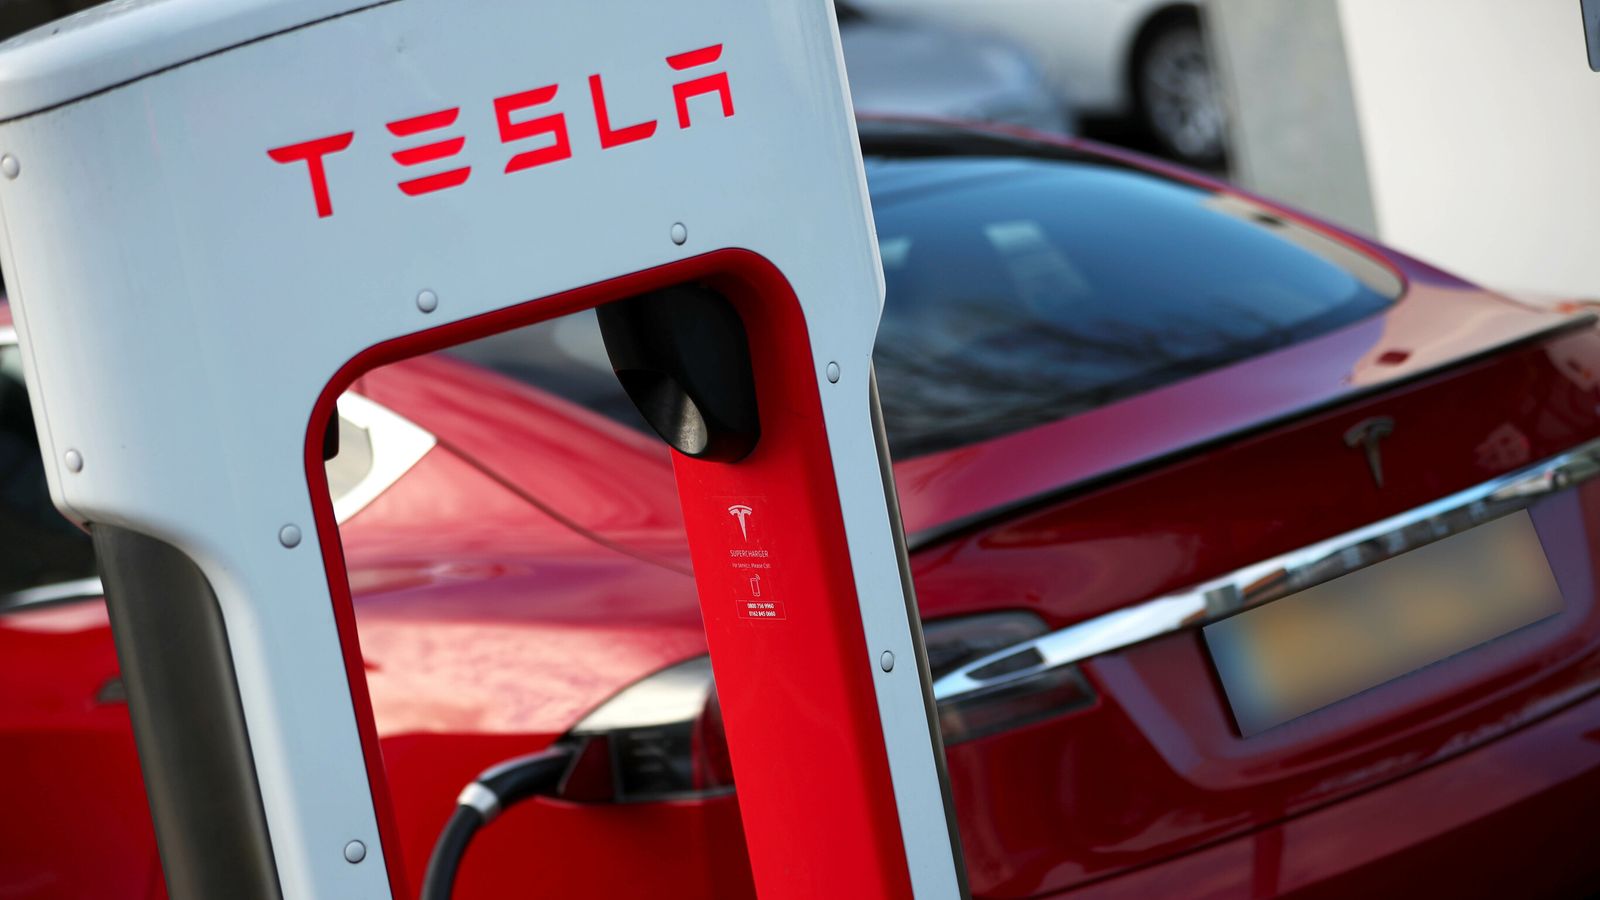 Tesla: Hundreds locked out of cars after server outage